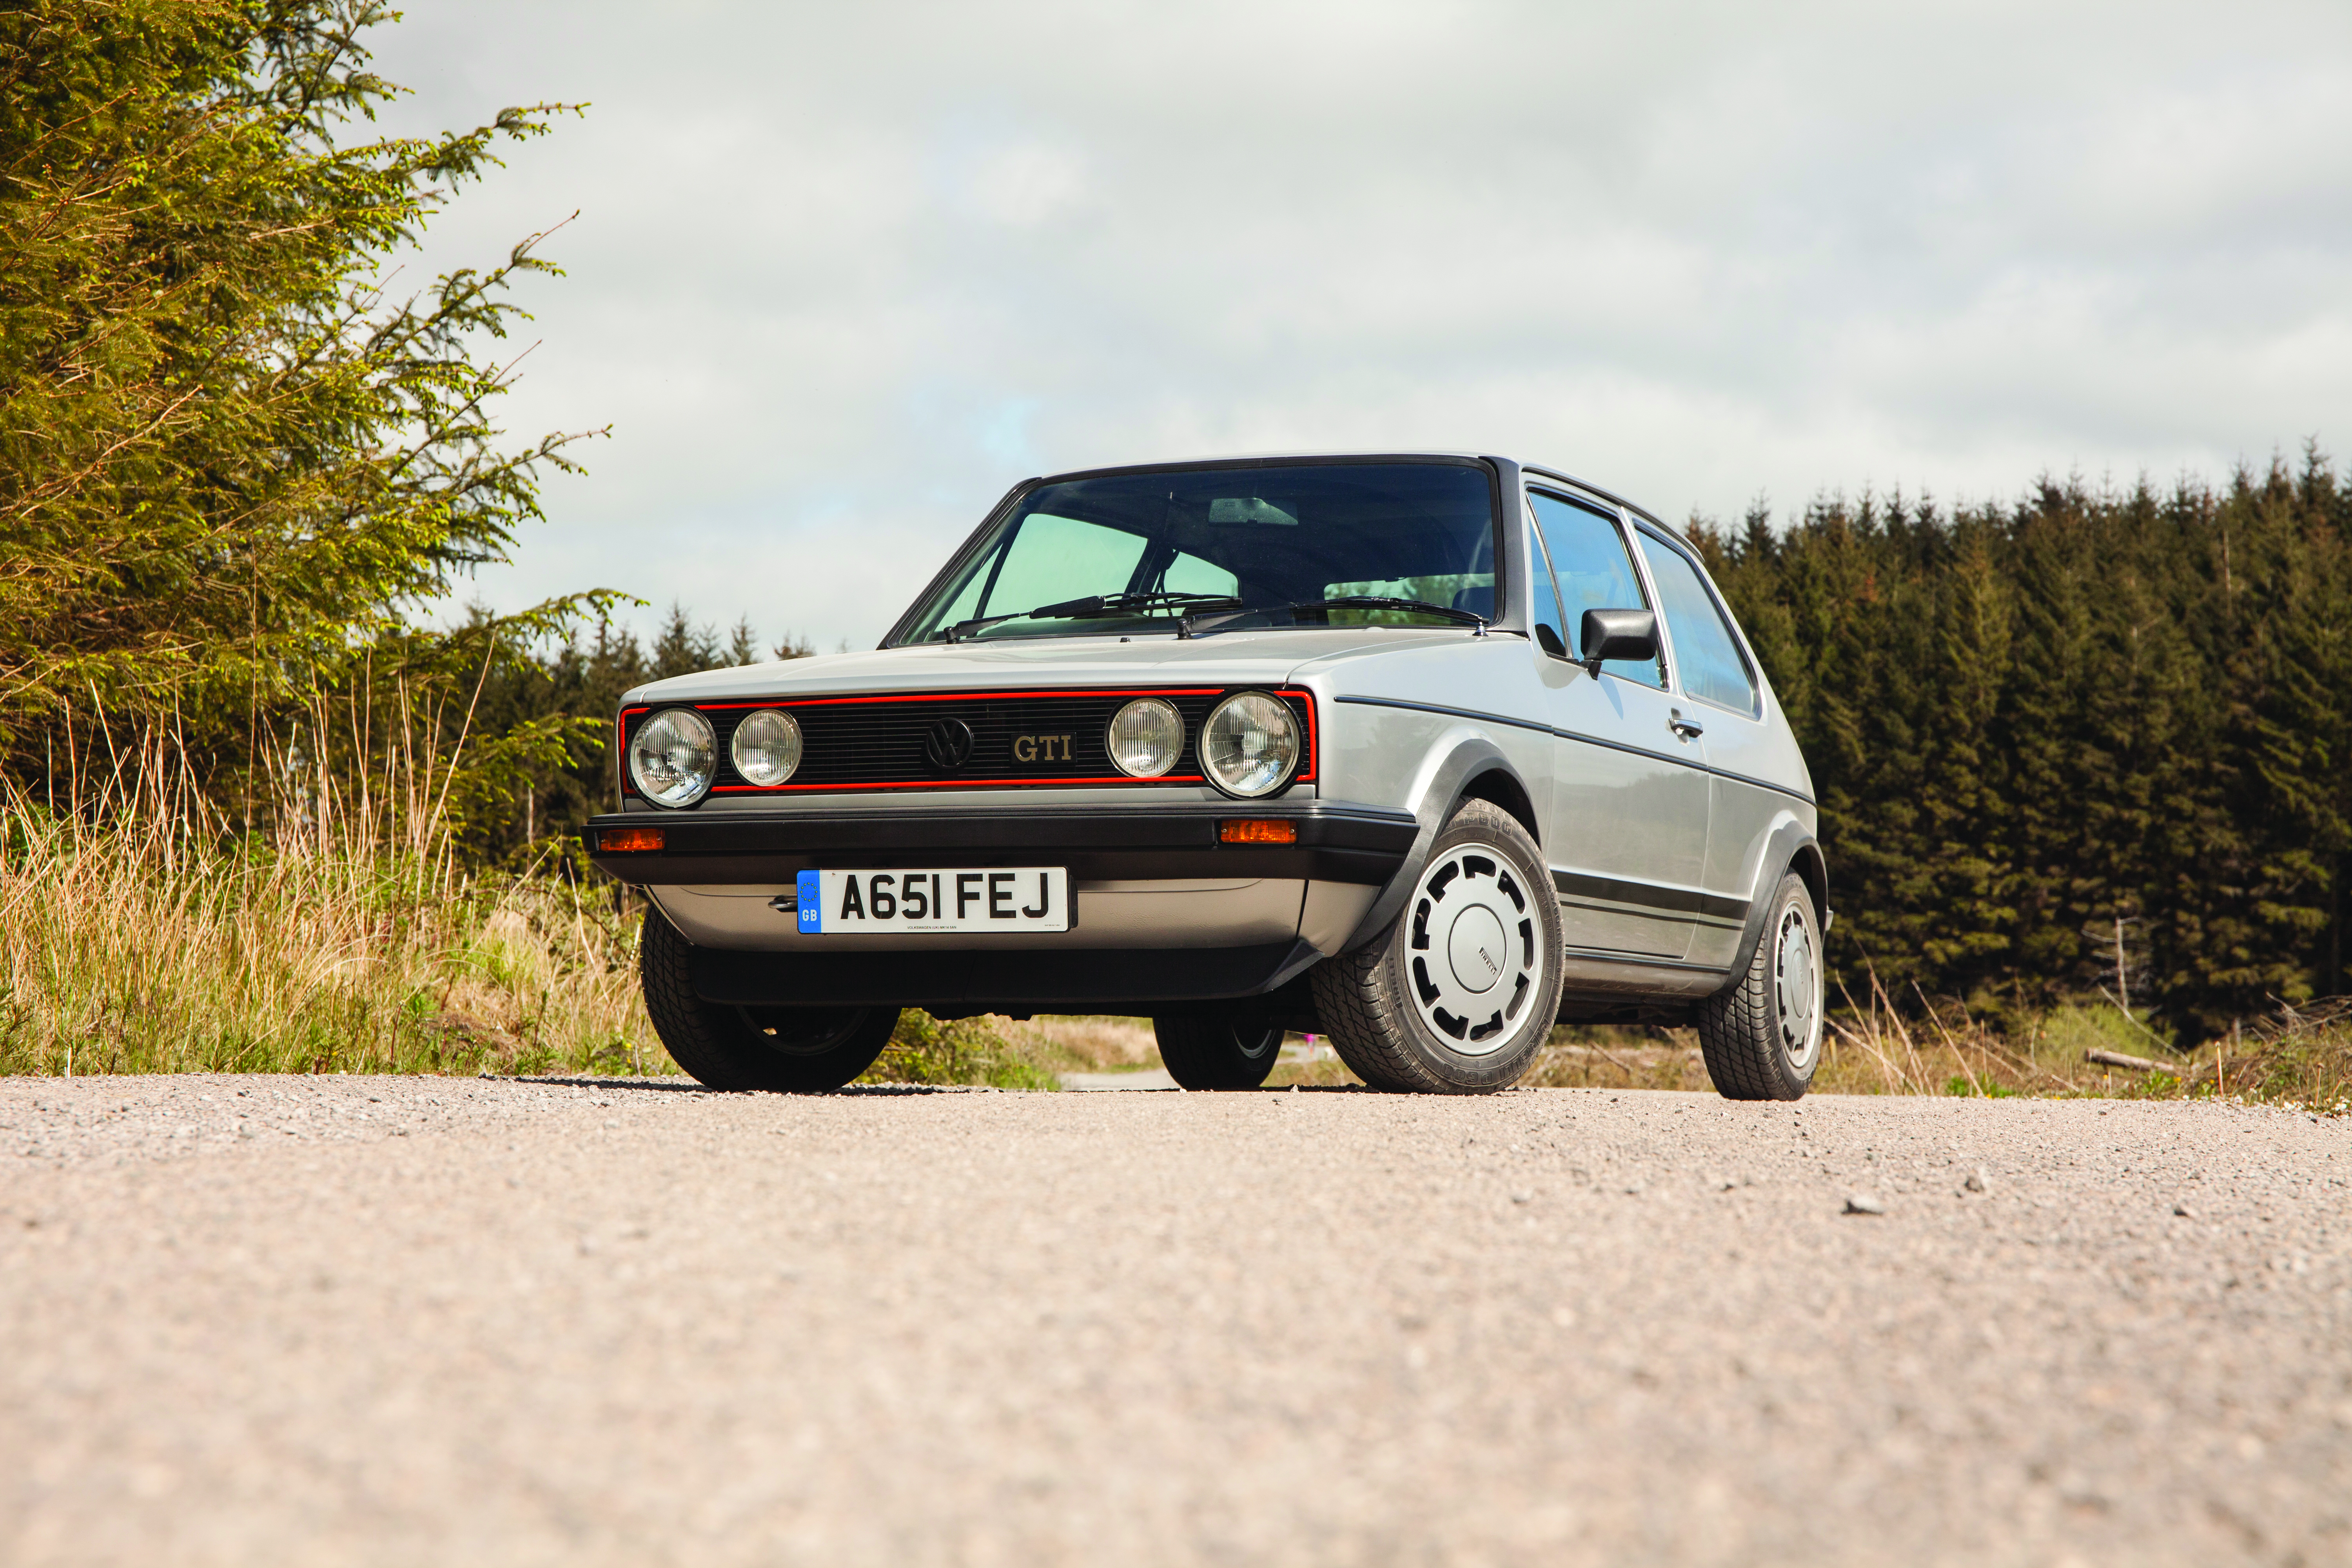 The MK1 GTI is easy to recognise